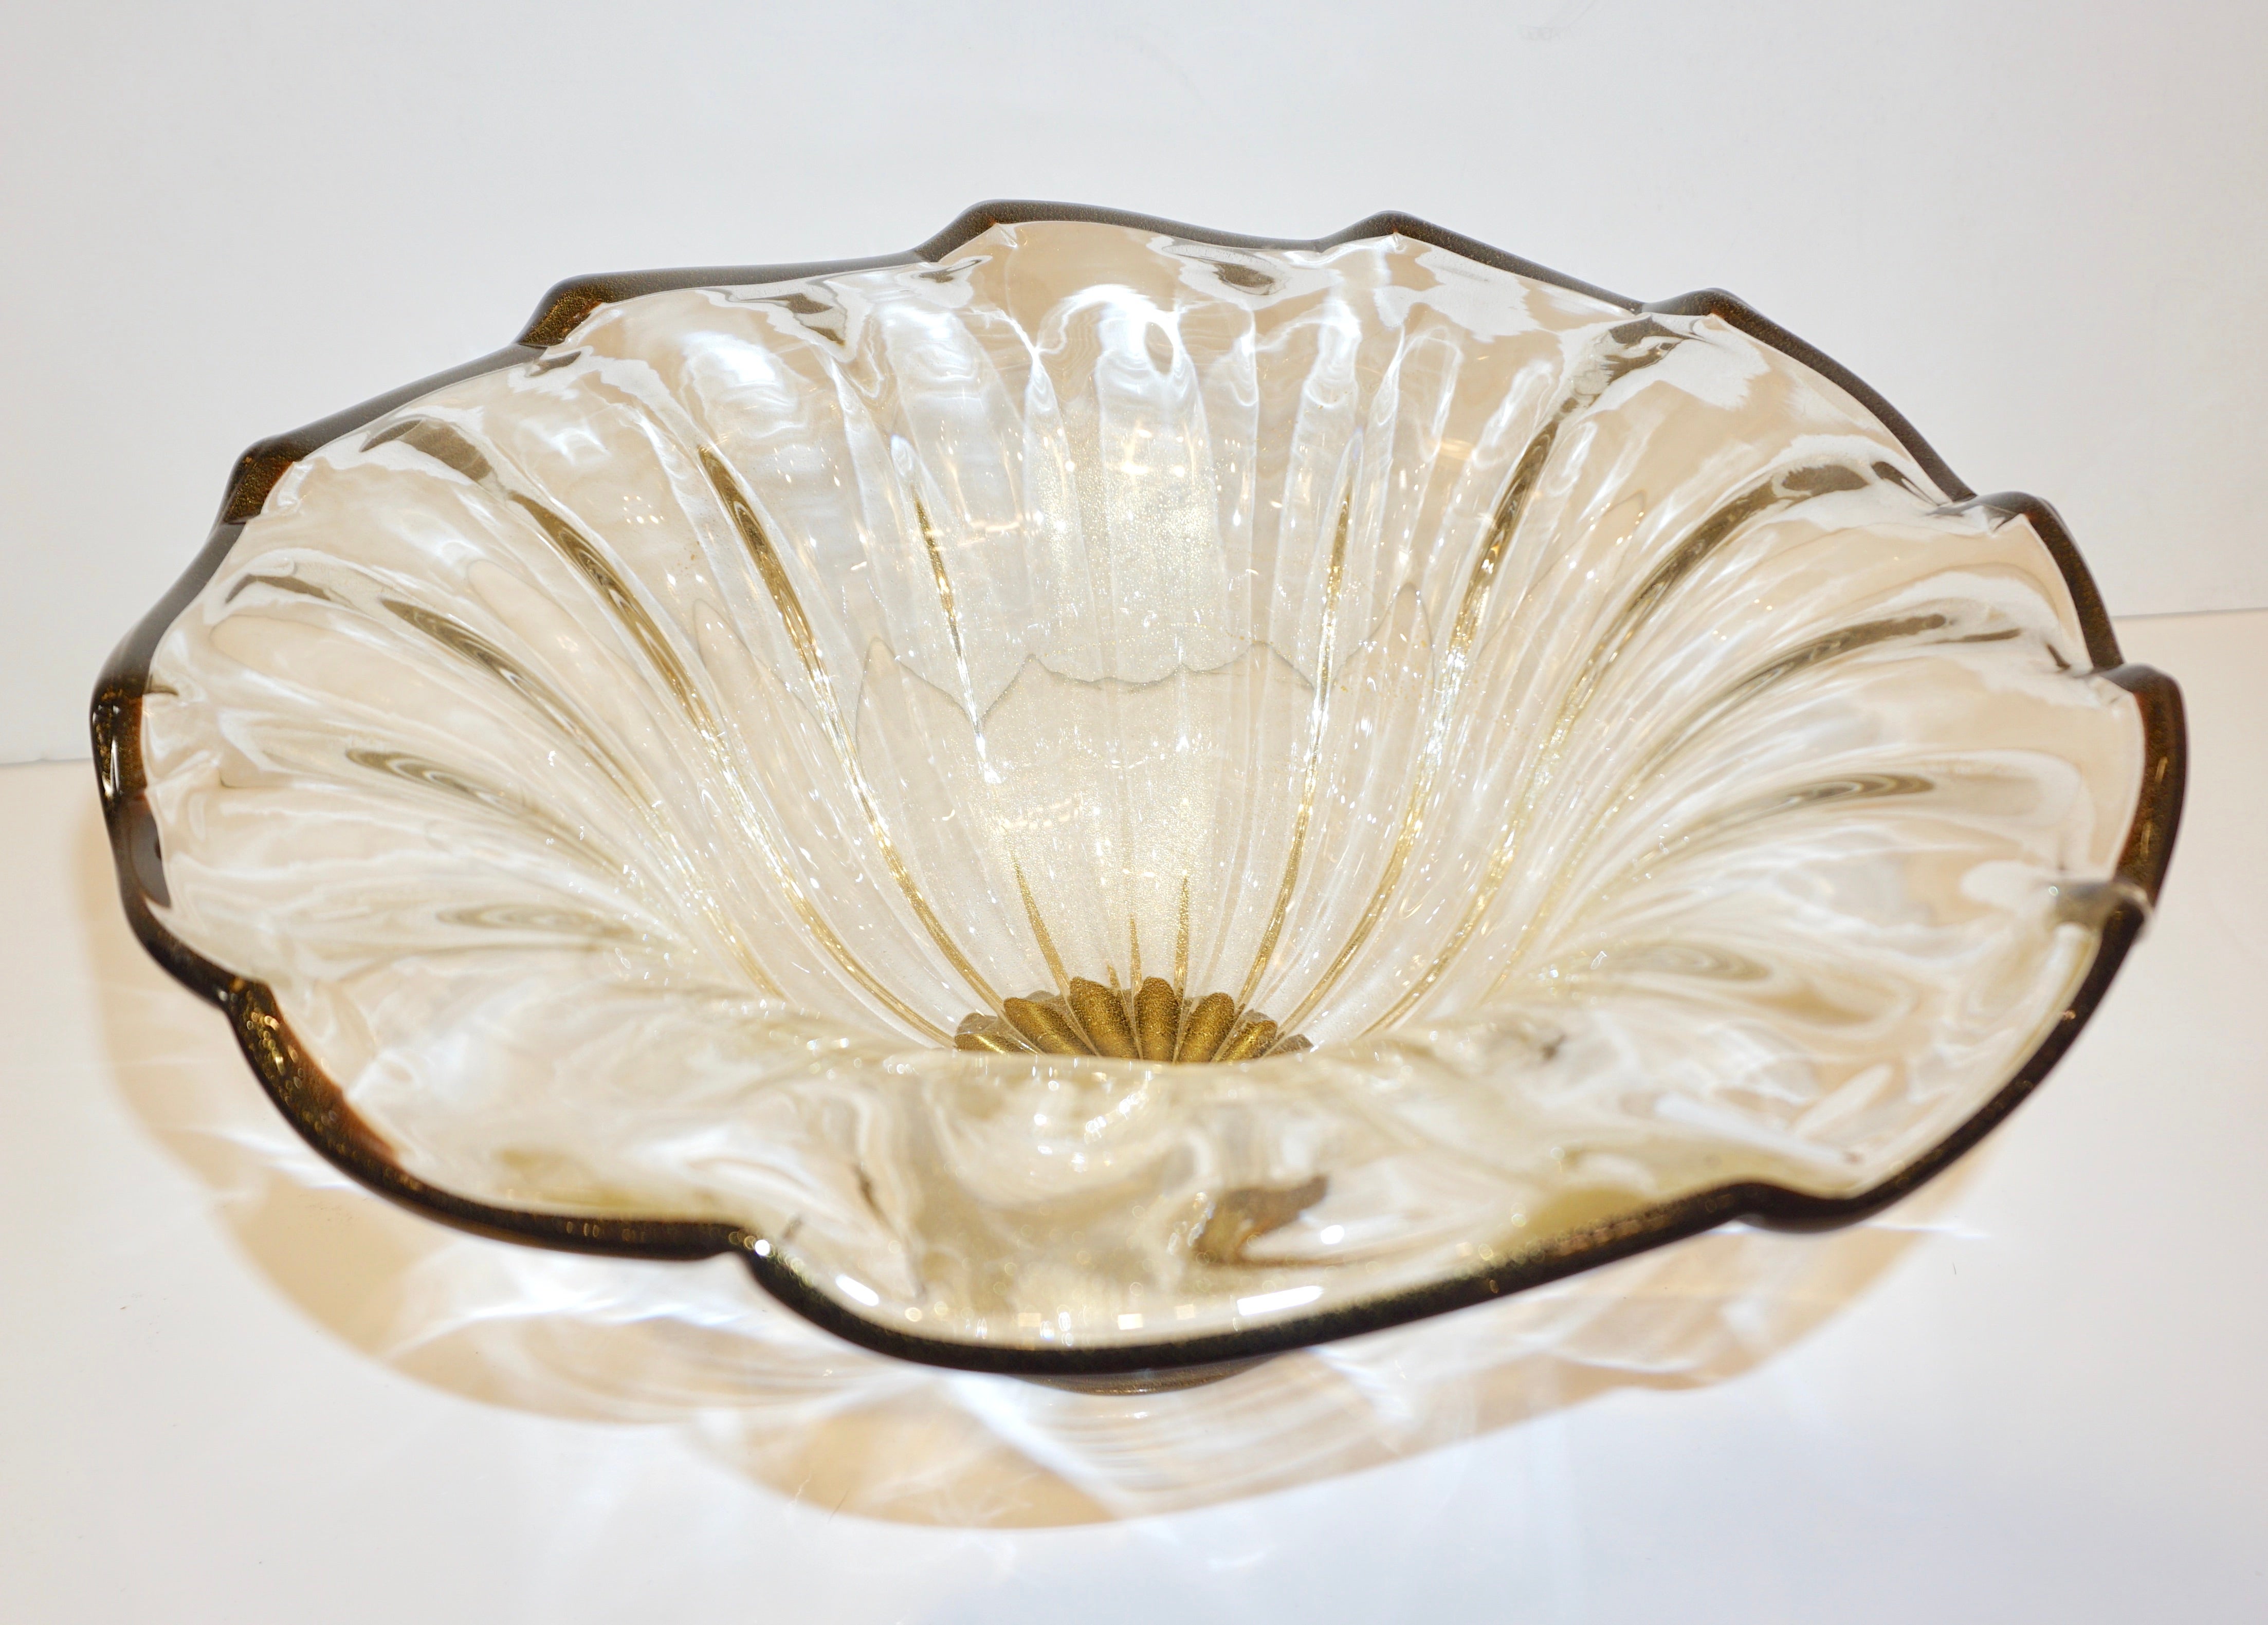 Italian Gold Dust Crystal Murano Glass Scalloped Centerpiece/Bowl with Black Rim For Sale 4